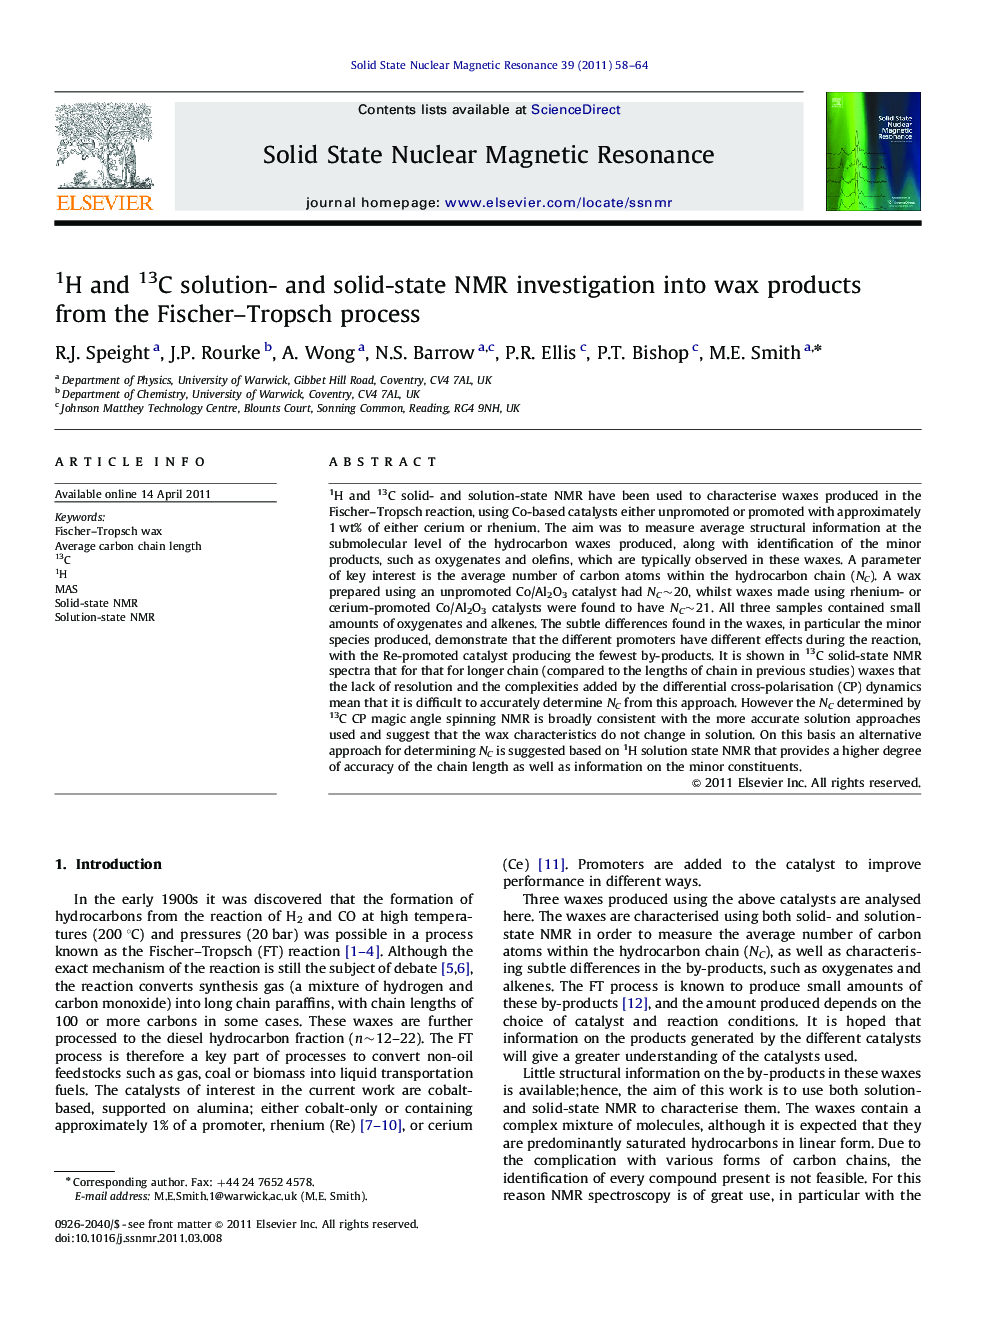 1H and 13C solution- and solid-state NMR investigation into wax products from the Fischer-Tropsch process